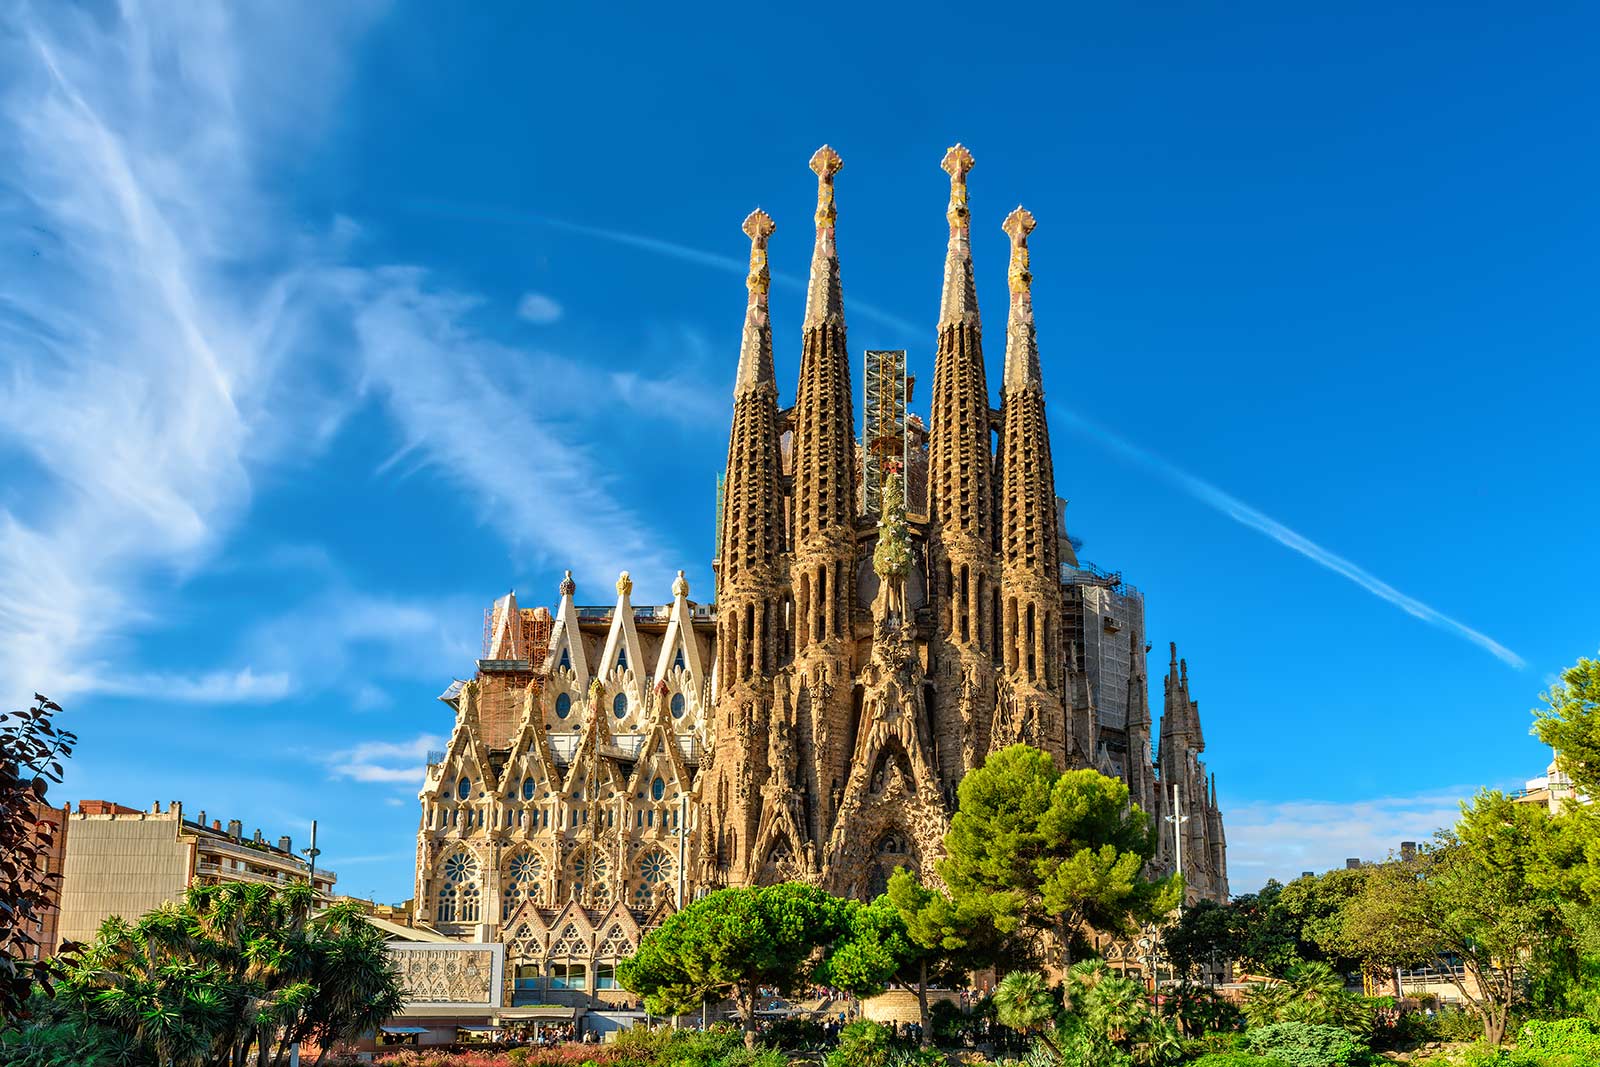 La Sagrada Familia cathedral in Barcelona. 10 things you must do in Barcelona